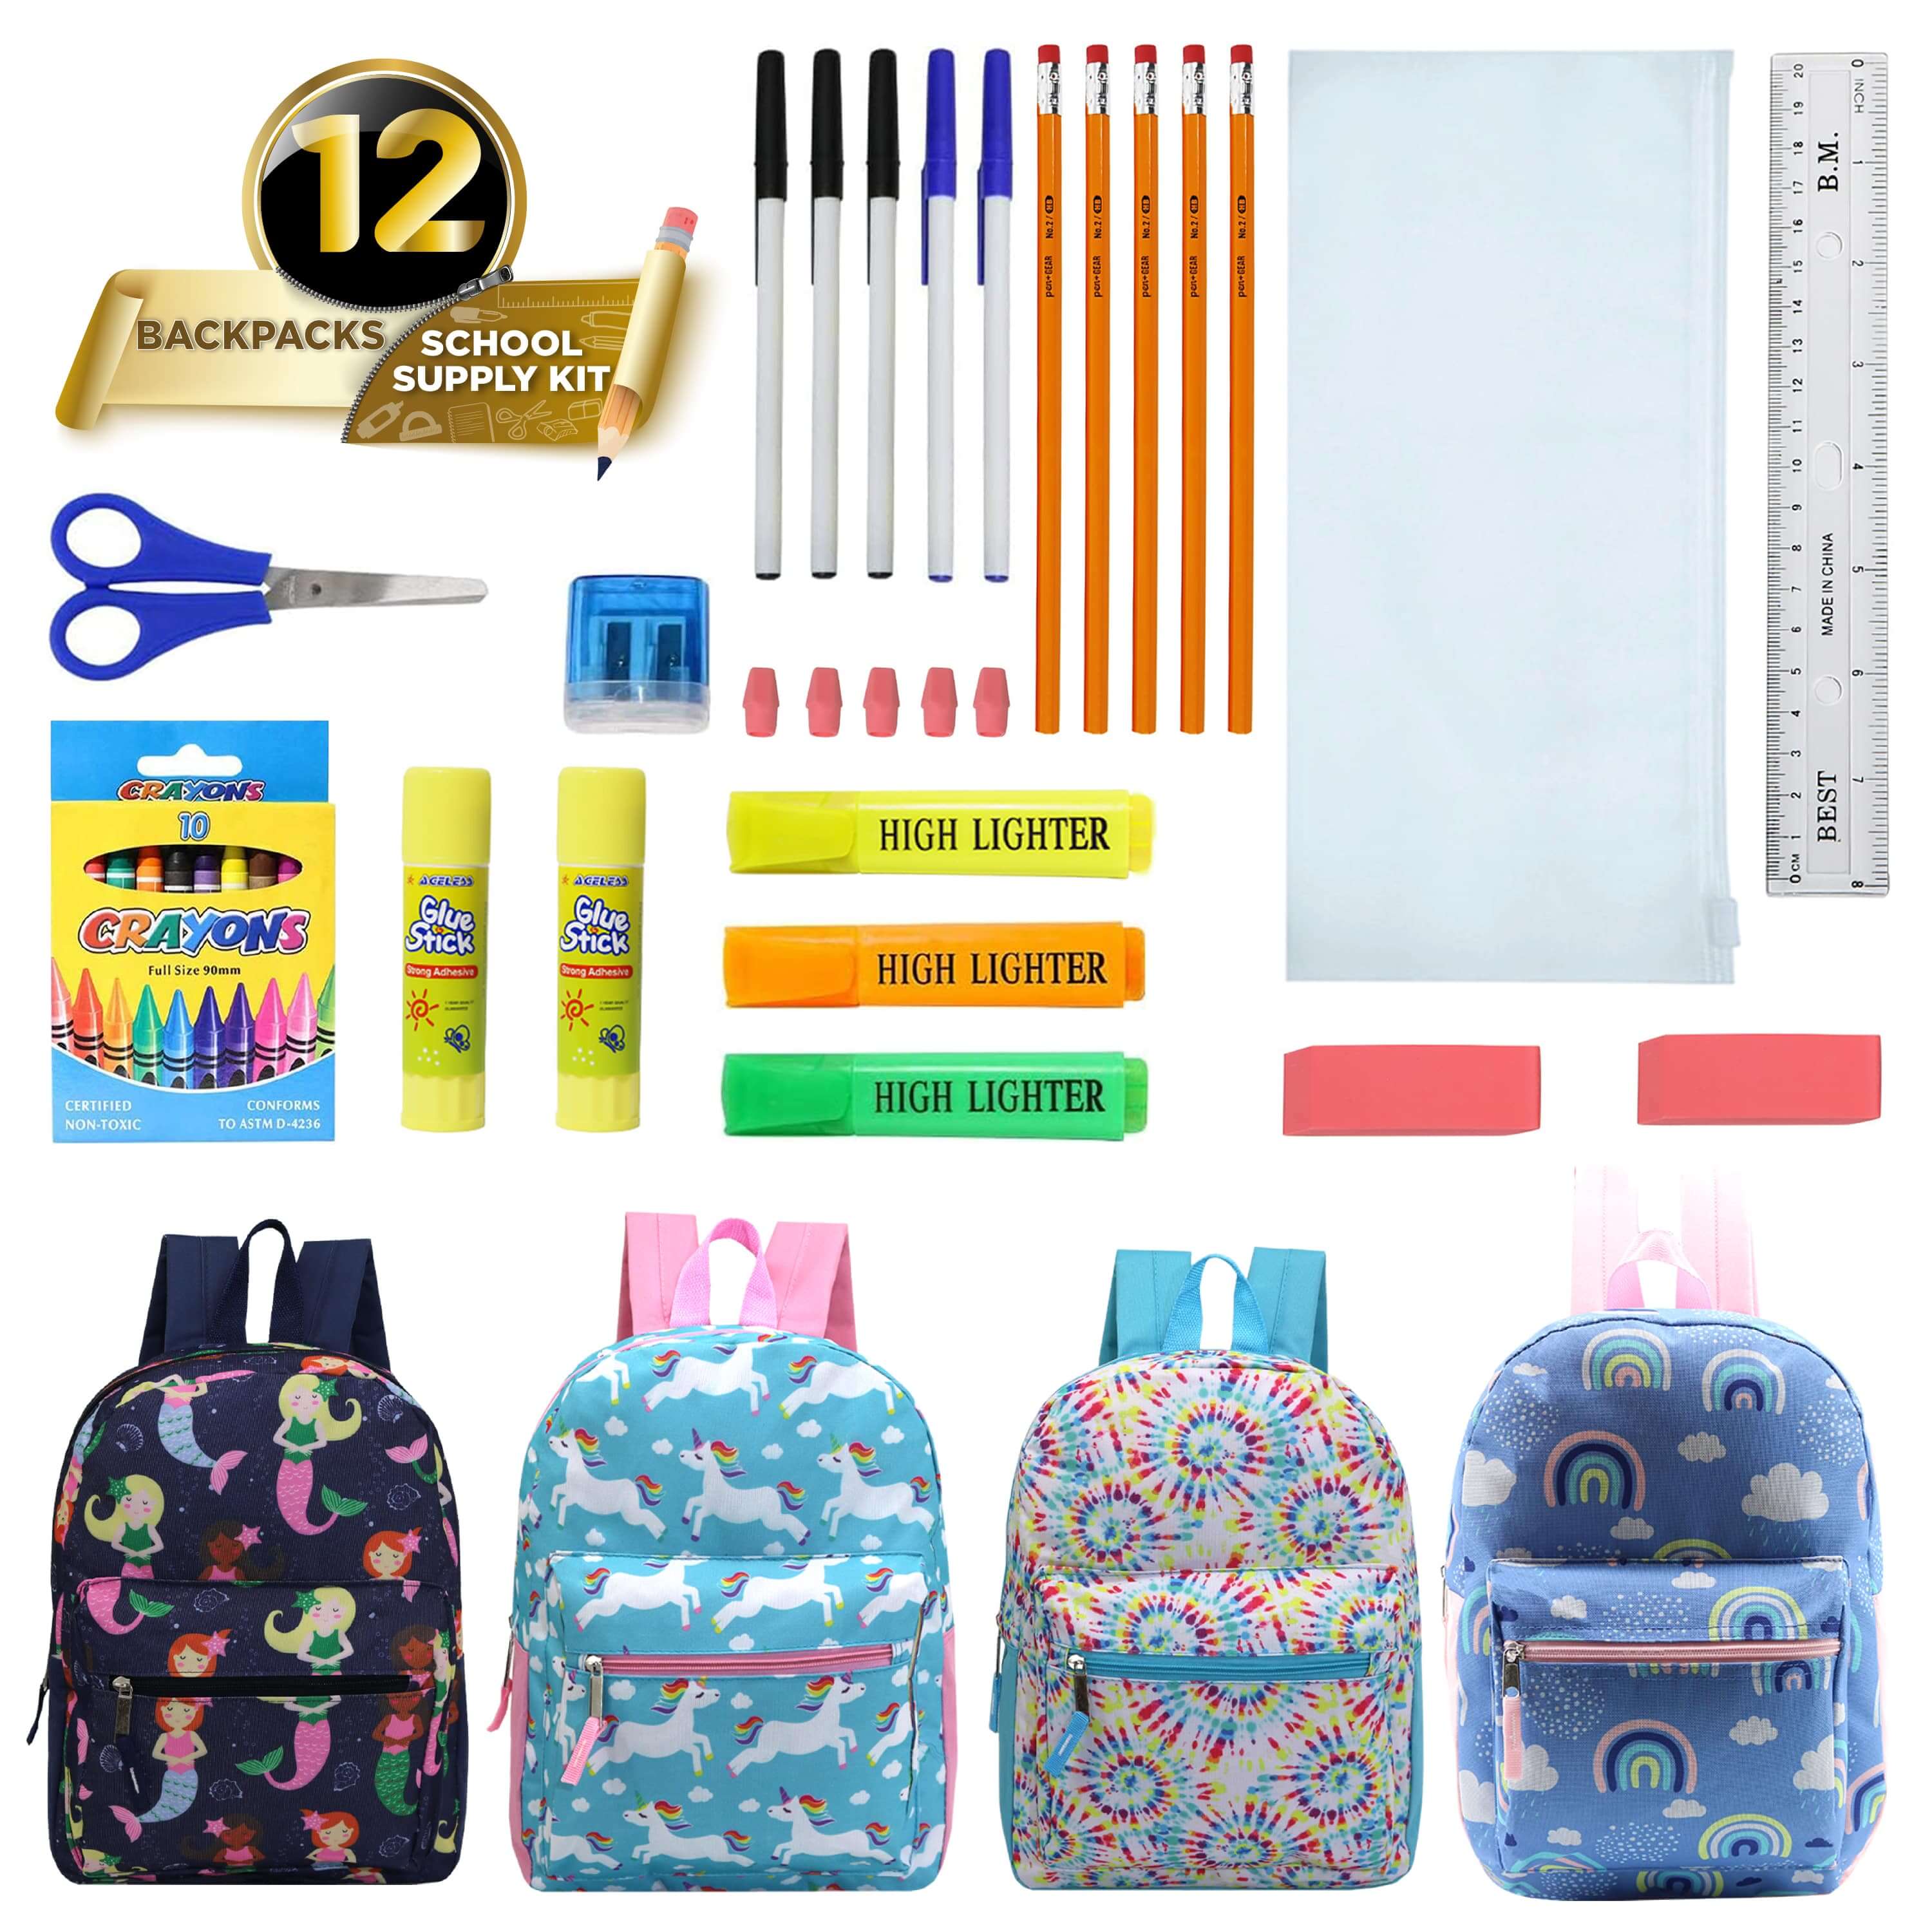 17 Inch Bulk Backpacks in Assorted Prints with School Supply Kits Wholesale - Case of 12